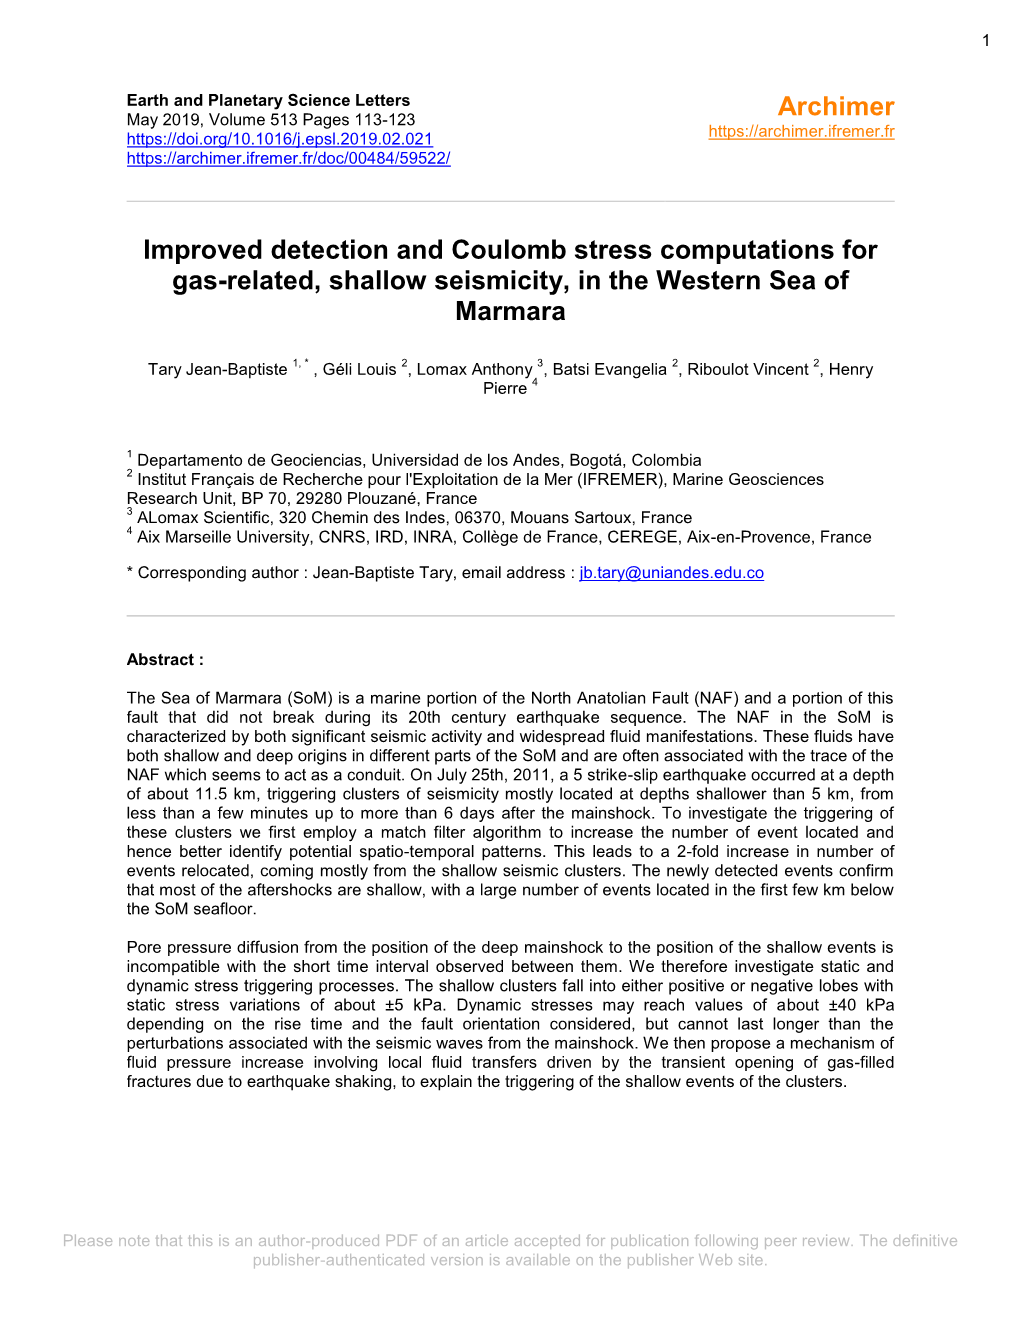 Improved Detection and Coulomb Stress Computations for Gas-Related, Shallow Seismicity, in the Western Sea of Marmara